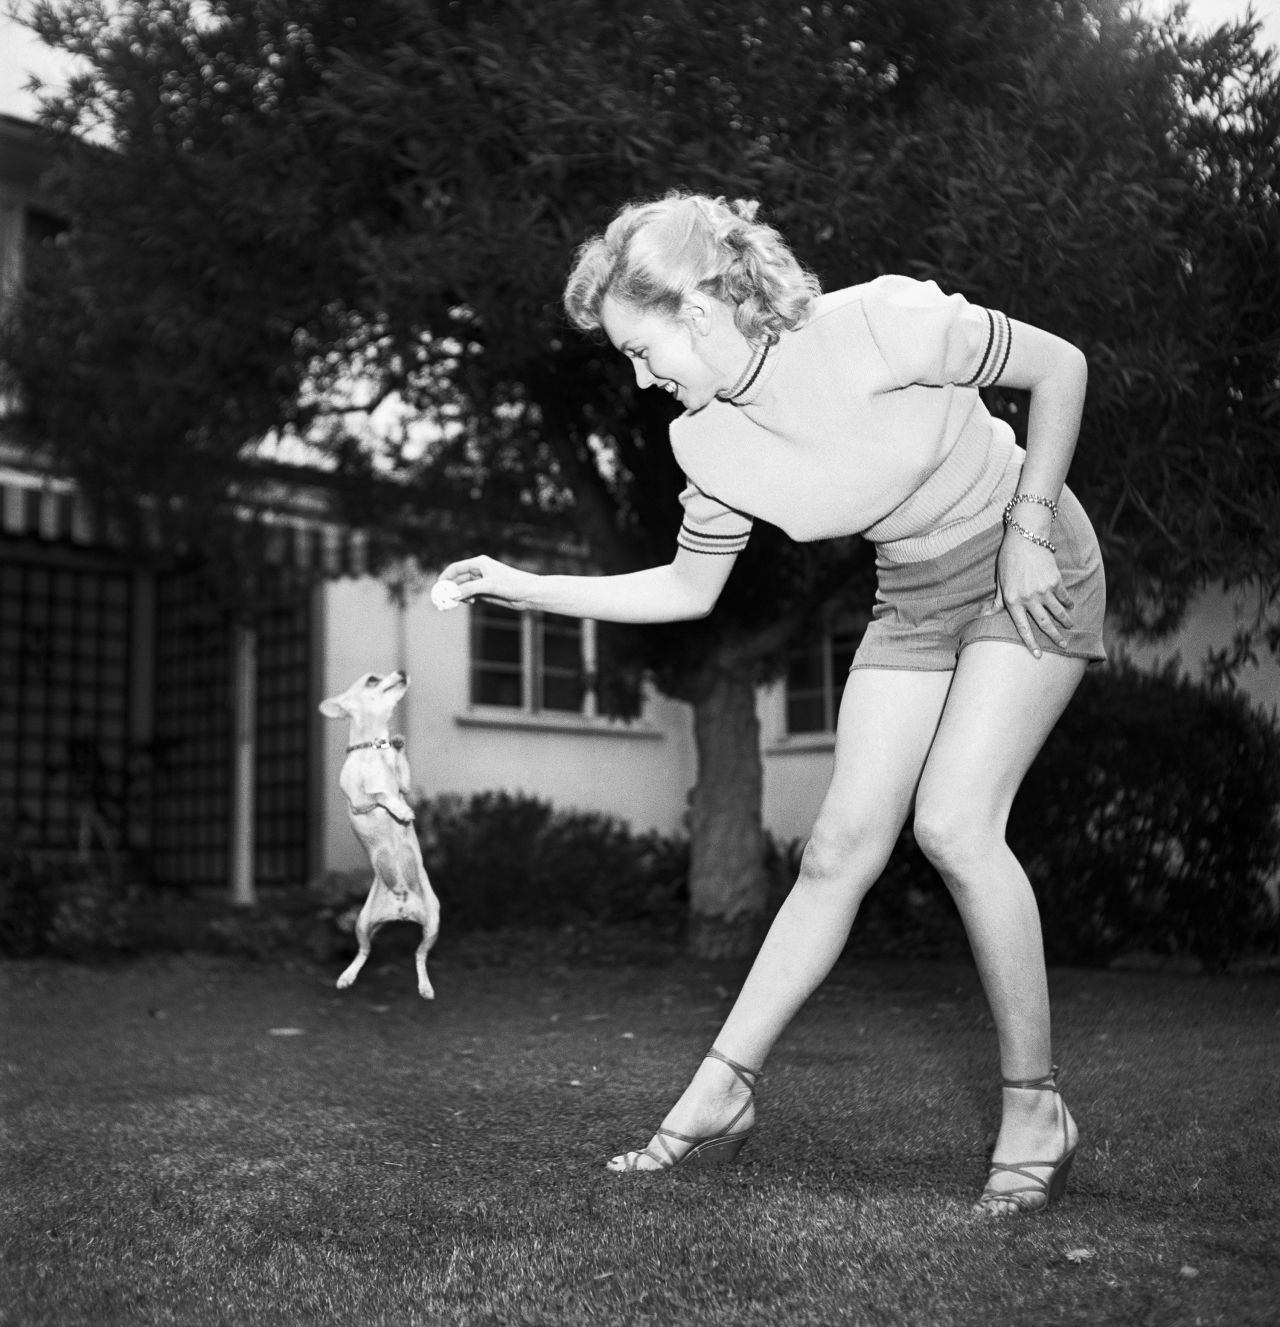 When she was out of contract, media-savvy Monroe used photo shoots to get her noticed. In this photo session, she's at the home of her first major movie agent, Johnny Hyde. He was one of the most powerful agents in Hollywood in the 1950s. <br /><br />"She loves to be in front of the camera," said photographer Nancy Lee Andrews."She's staging it, and the photographer, he's clicking it... Follow Marilyn, and you'll get the shot."